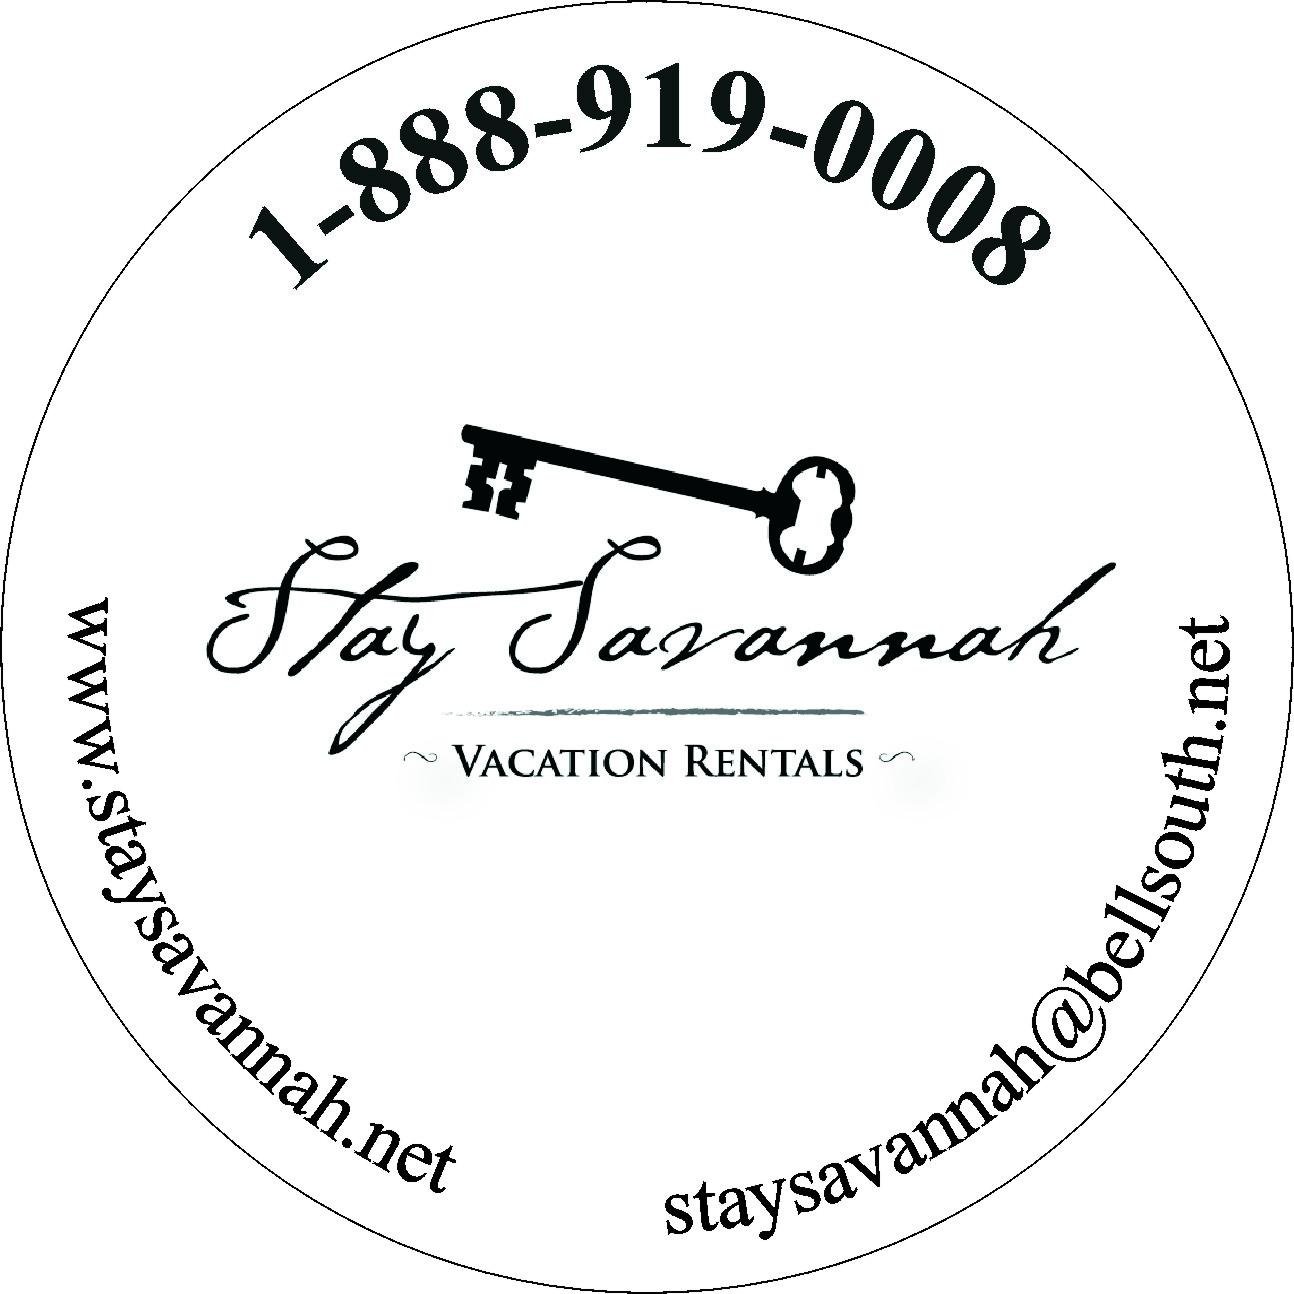 Largest locally owned and operated vacation rental manager in Savannah,Georgia with over 60 properties to choose from. Call us toll free at 888-919-0008.